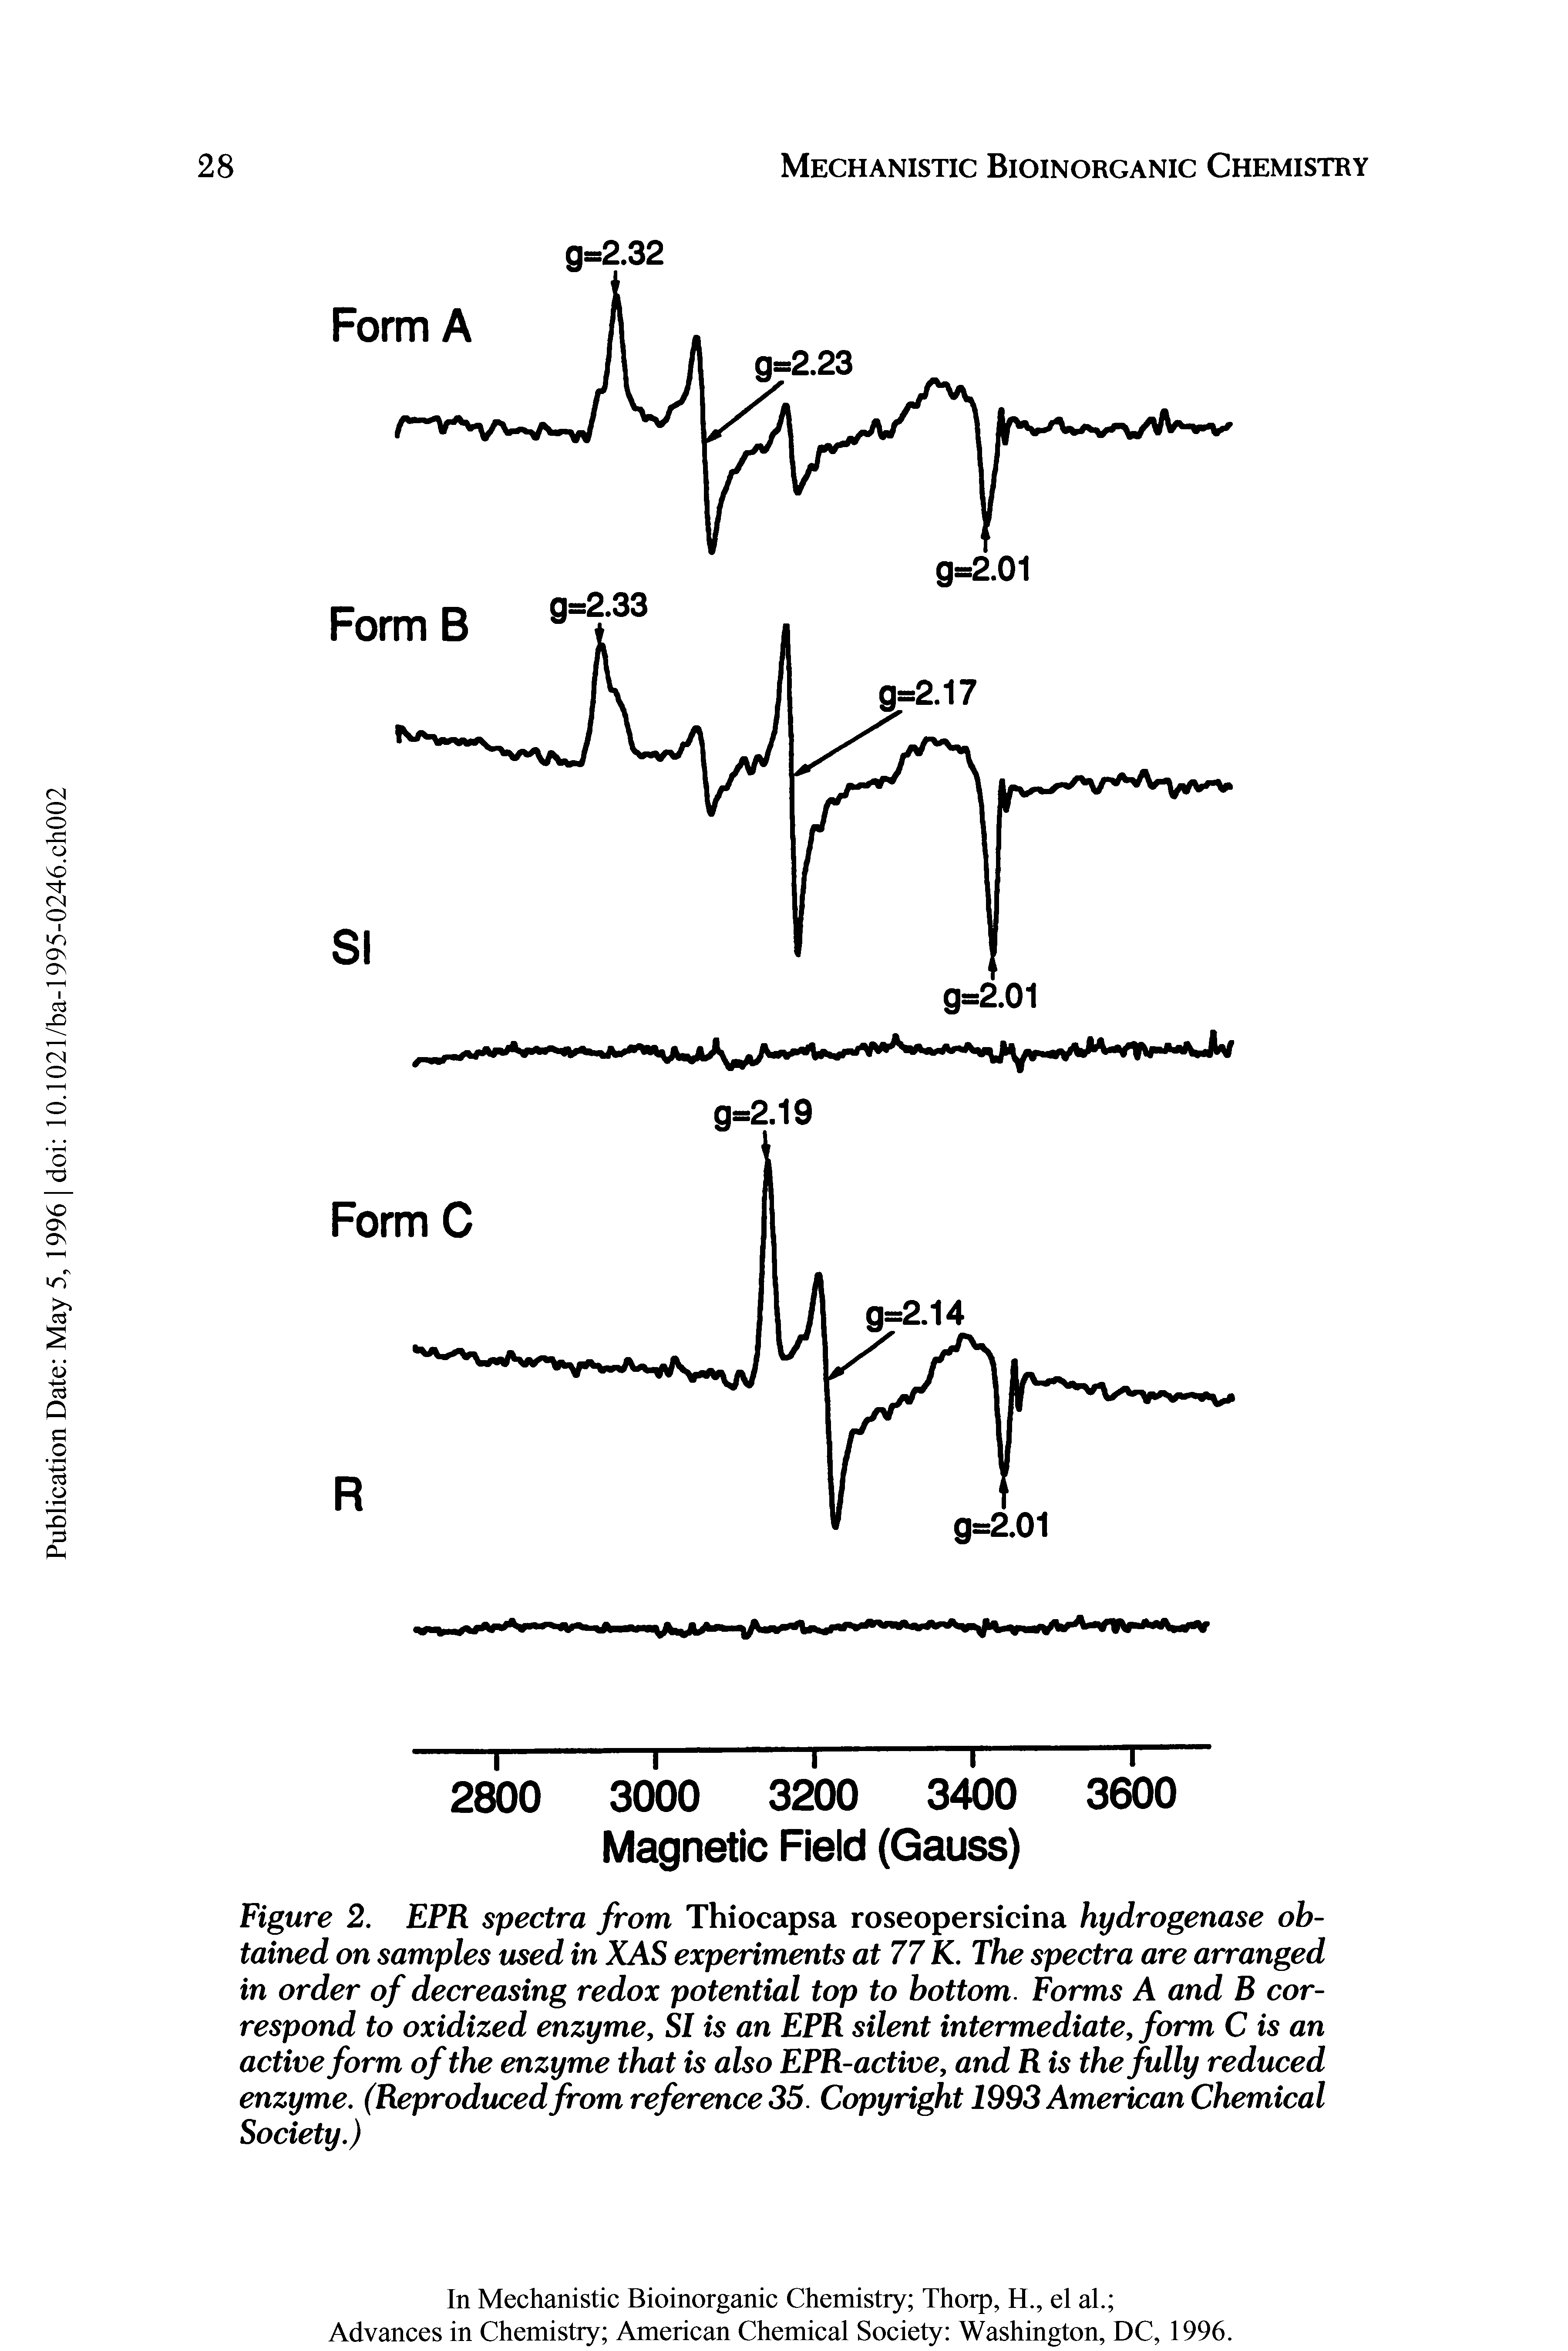 Figure 2. EPR spectra from Thiocapsa roseopersicina hydrogenase obtained on samples used in XAS experiments at 77 K. The spectra are arranged in order of decreasing redox potential top to bottom. Forms A and B correspond to oxidized enzyme, SI is an EPR silent intermediate, form C is an active form of the enzyme that is also EPR-active, and R is the fully reduced enzyme. (Reproduced from reference 35. Copyright 1993 American Chemical Society.)...